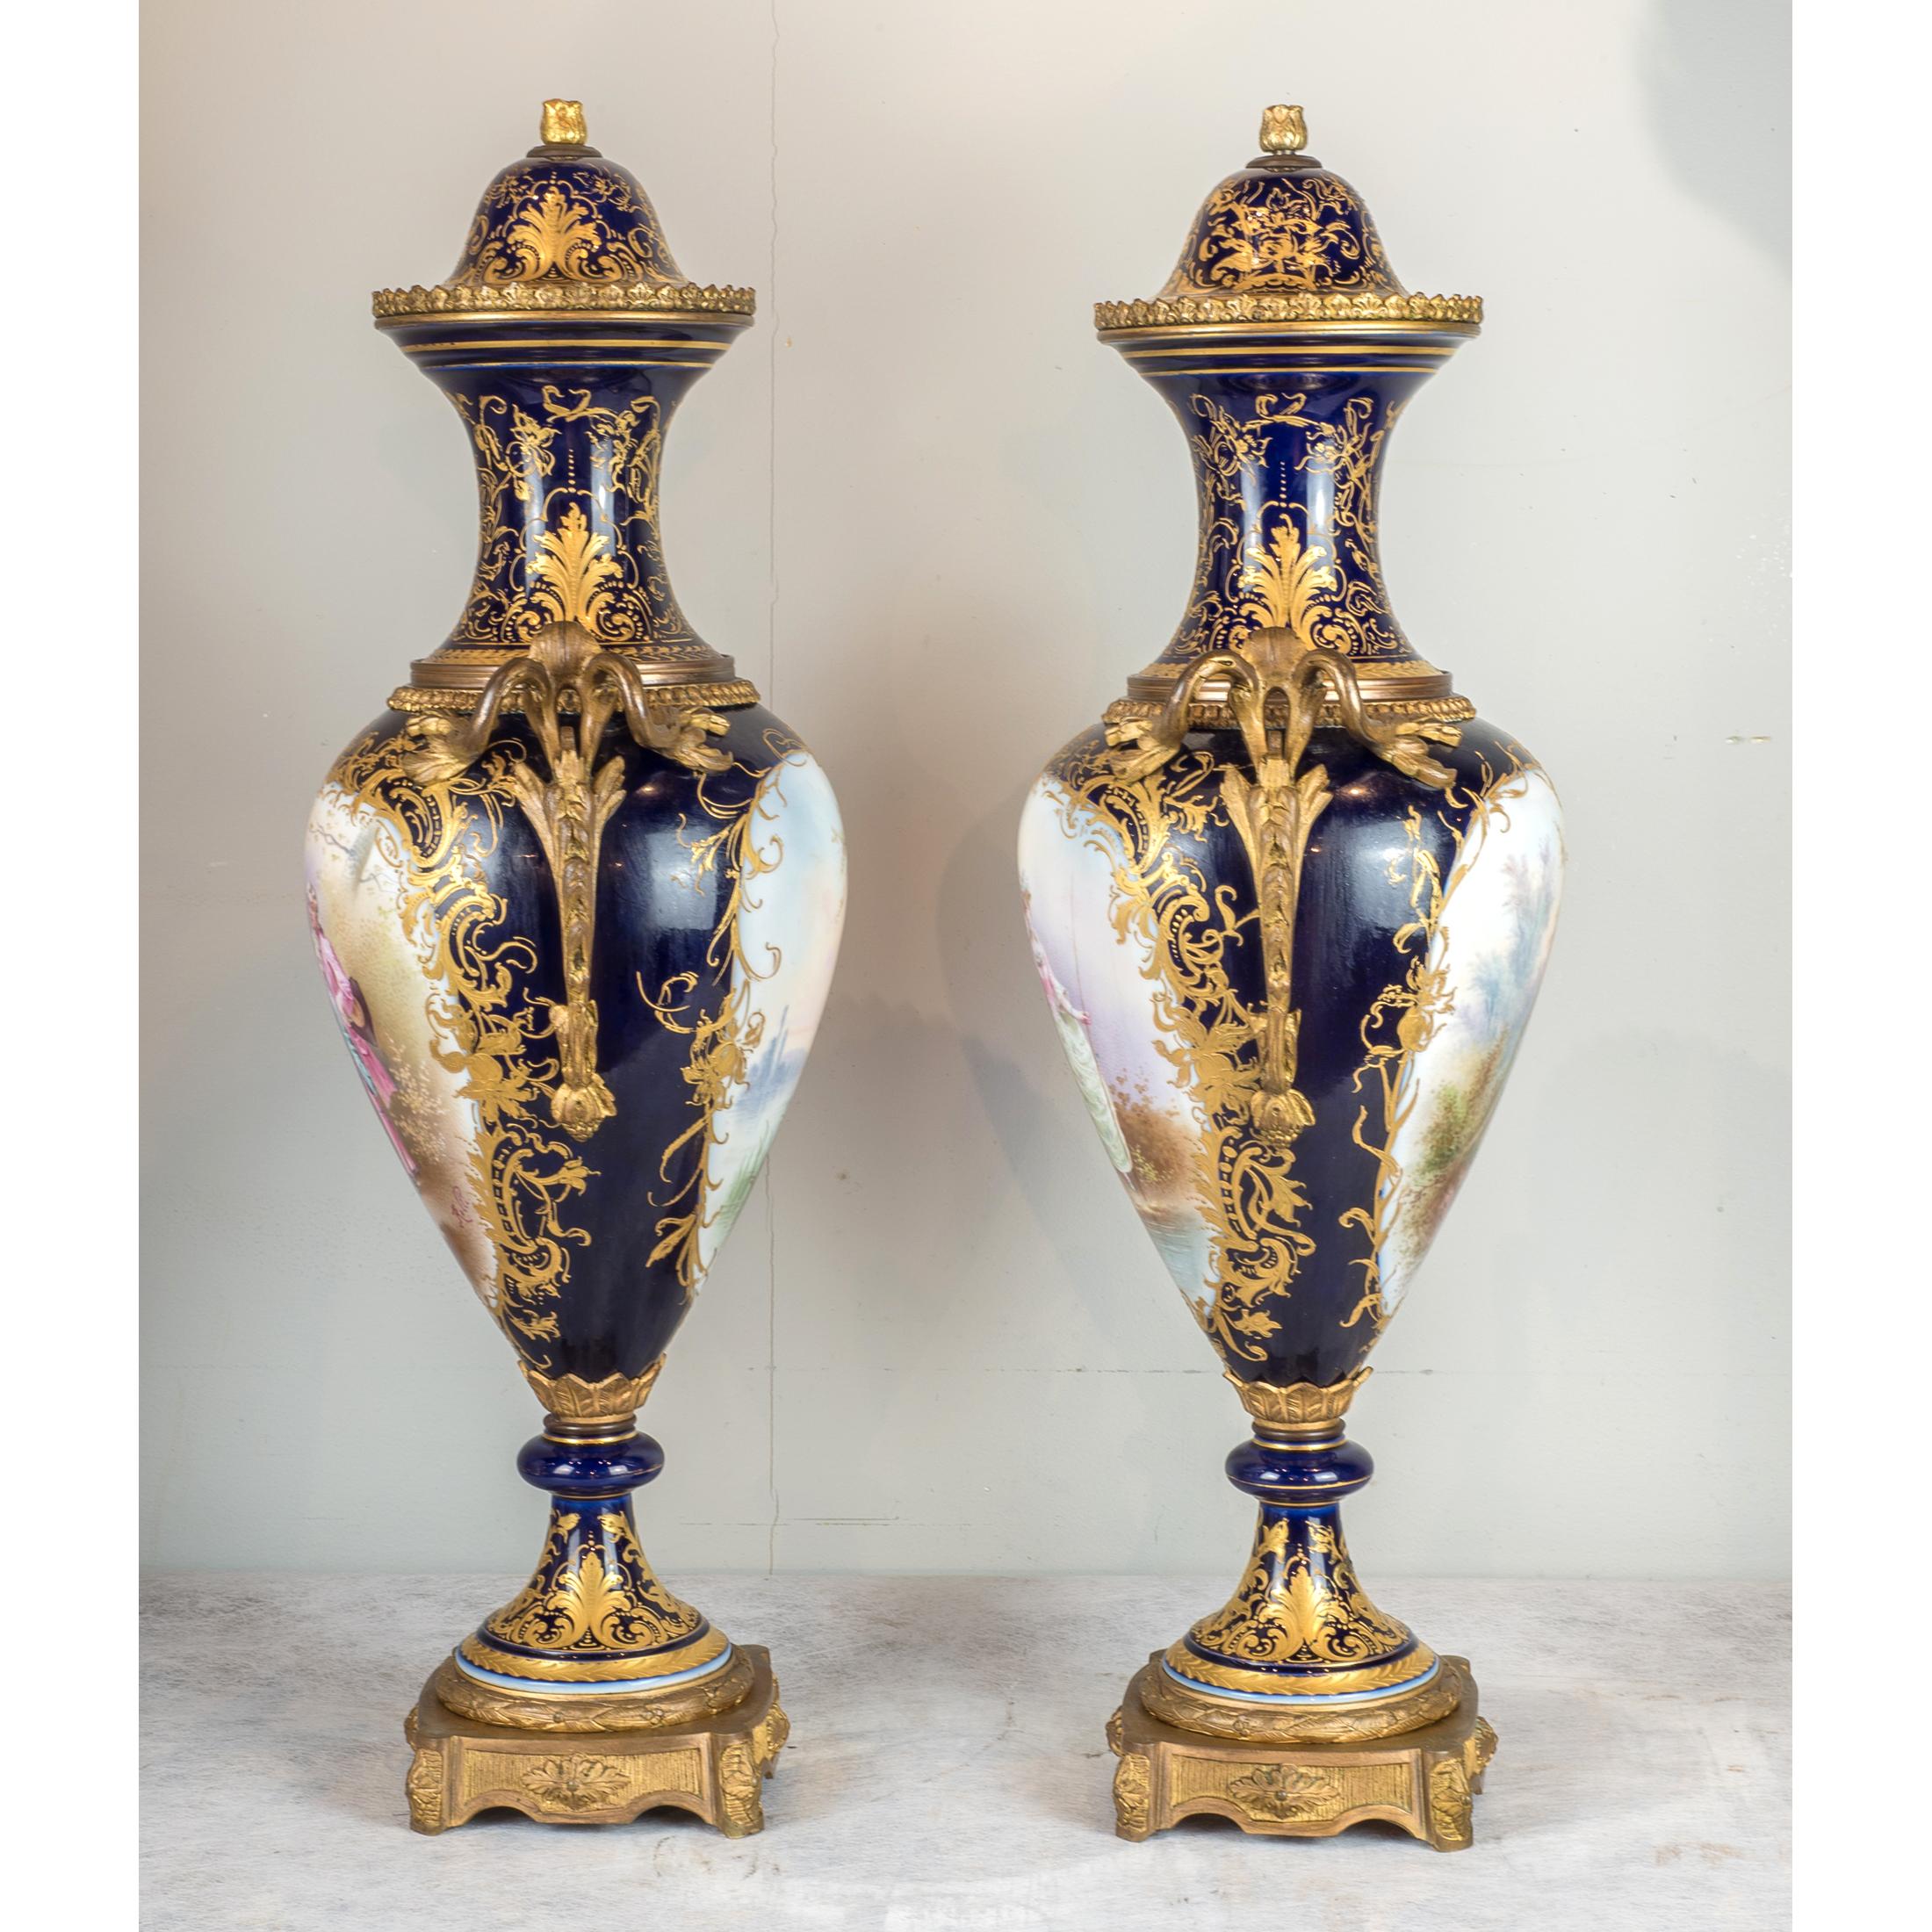 A fine pair of large gilt bronze mounted Sèvres Porcelain vases and cover.
The vases hand-painted with scenes of lovers in the garden, the reverse with landscapes, beautifully gilded throughout on lustre-ground.
Signed ‘Rolli’

Date: 19th